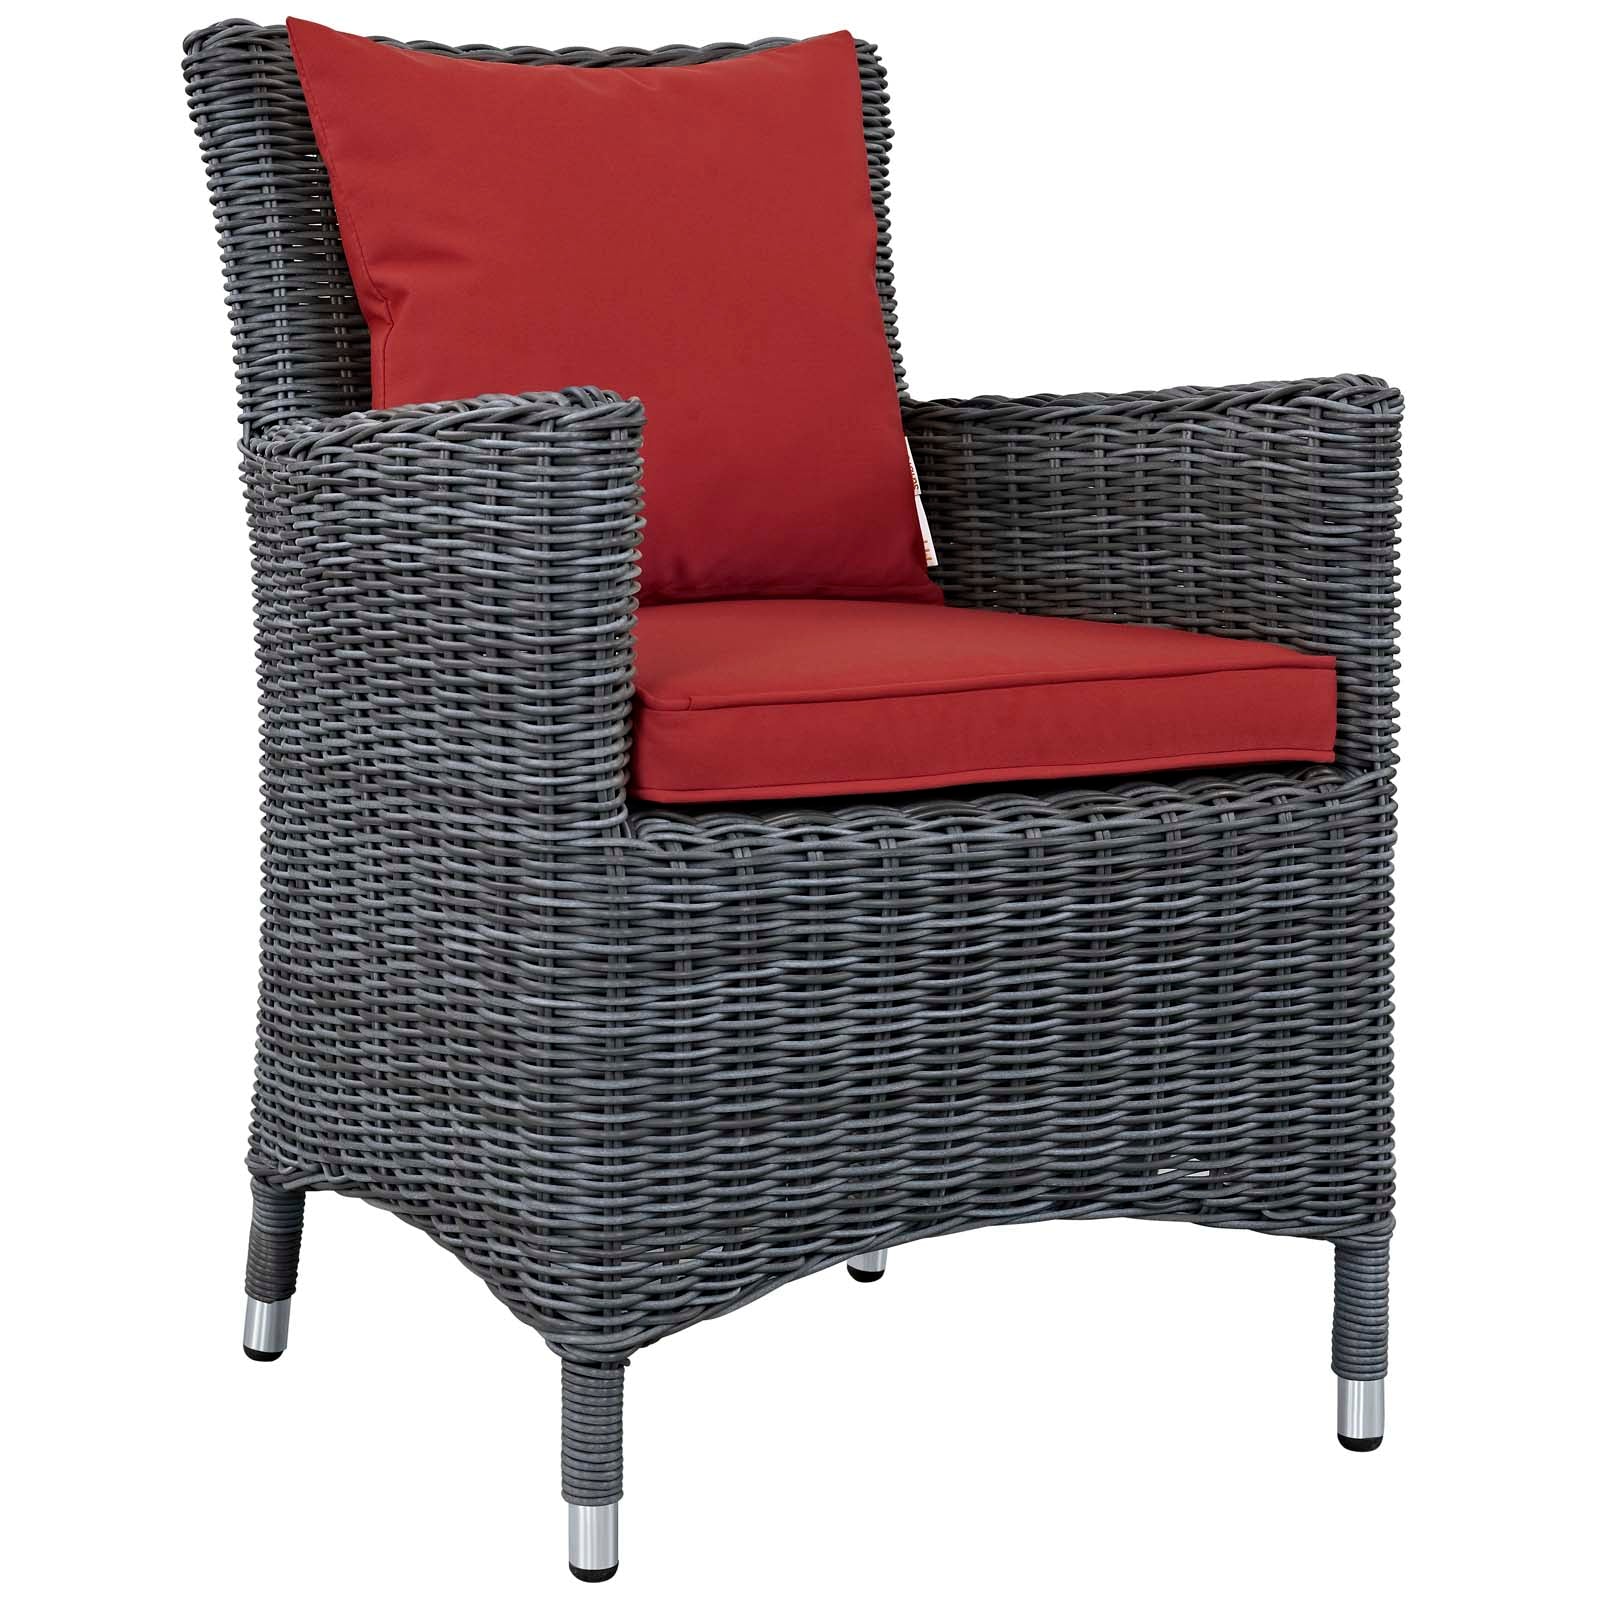 Modway Outdoor Dining Chairs - Summon Dining Outdoor Patio Sunbrella Armchair Canvas Red